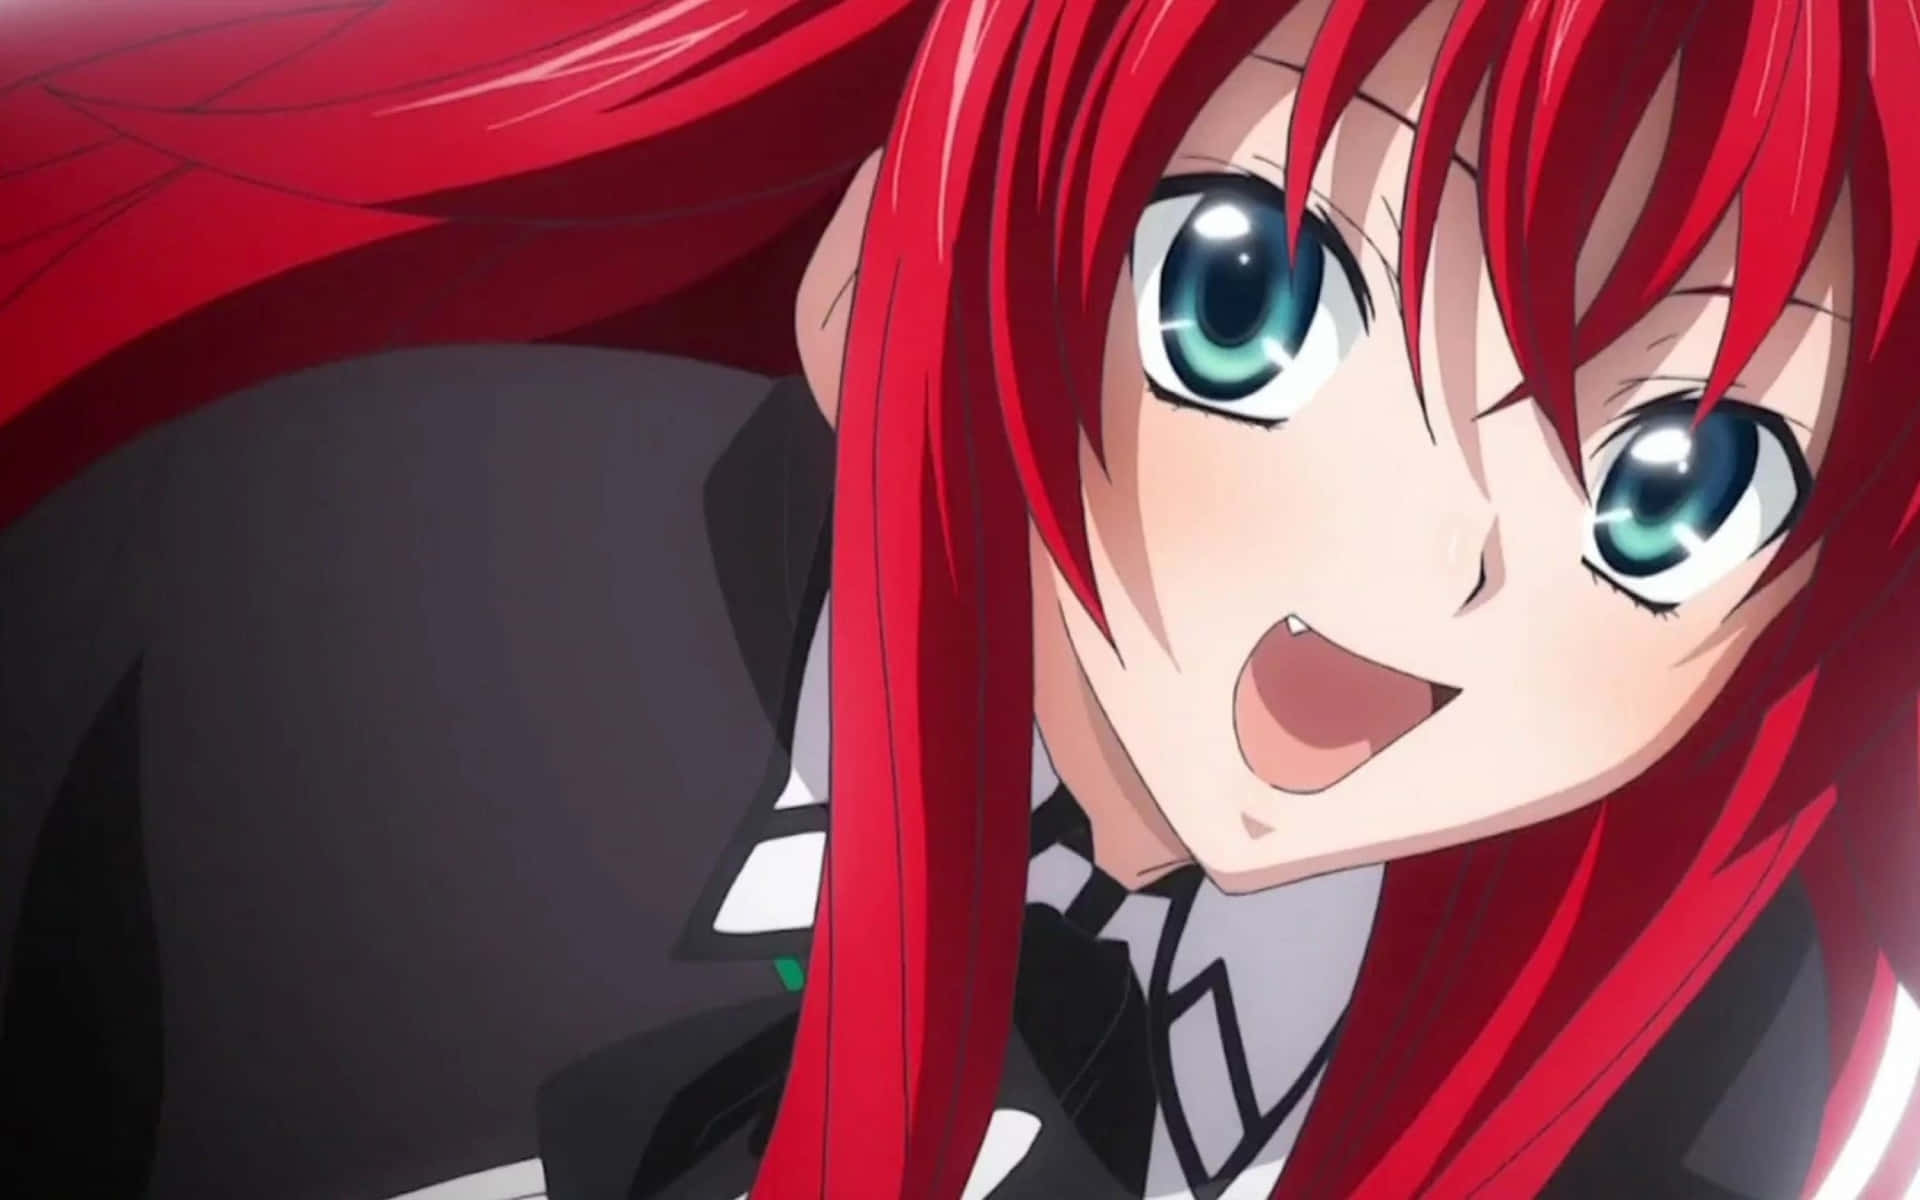 Download Join Issei Hyodo in his wild Highschool Dxd adventure